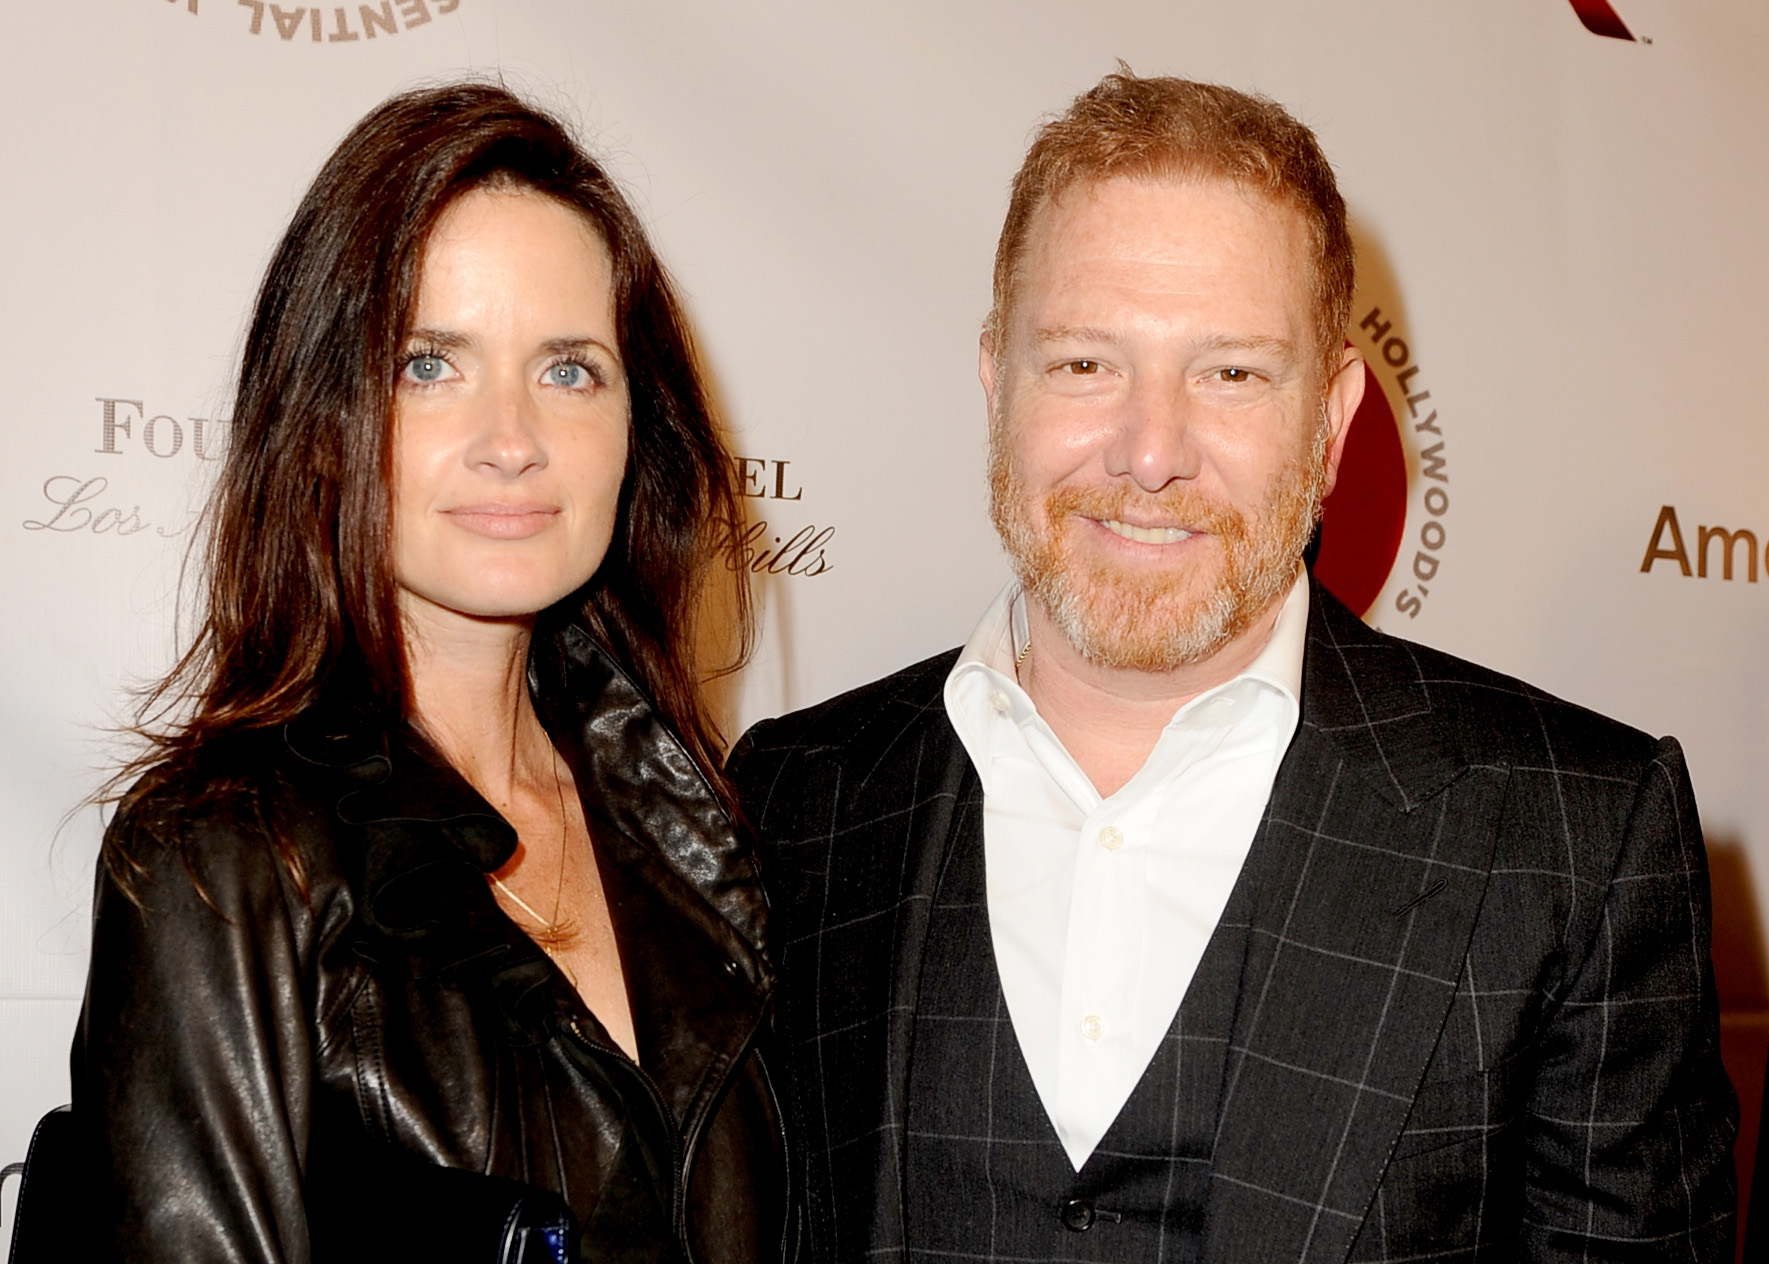 Relativity Media CEO Ryan Kavanaugh (R) and Valerie Michaels attend TheWrap's 5th Annual Oscar Party at Culina Restaurant at the Four Seasons Los Angeles on February 26, 2014 in Beverly Hills, California.  (Photo by Kevin Winter/Getty Images For TheWrap)